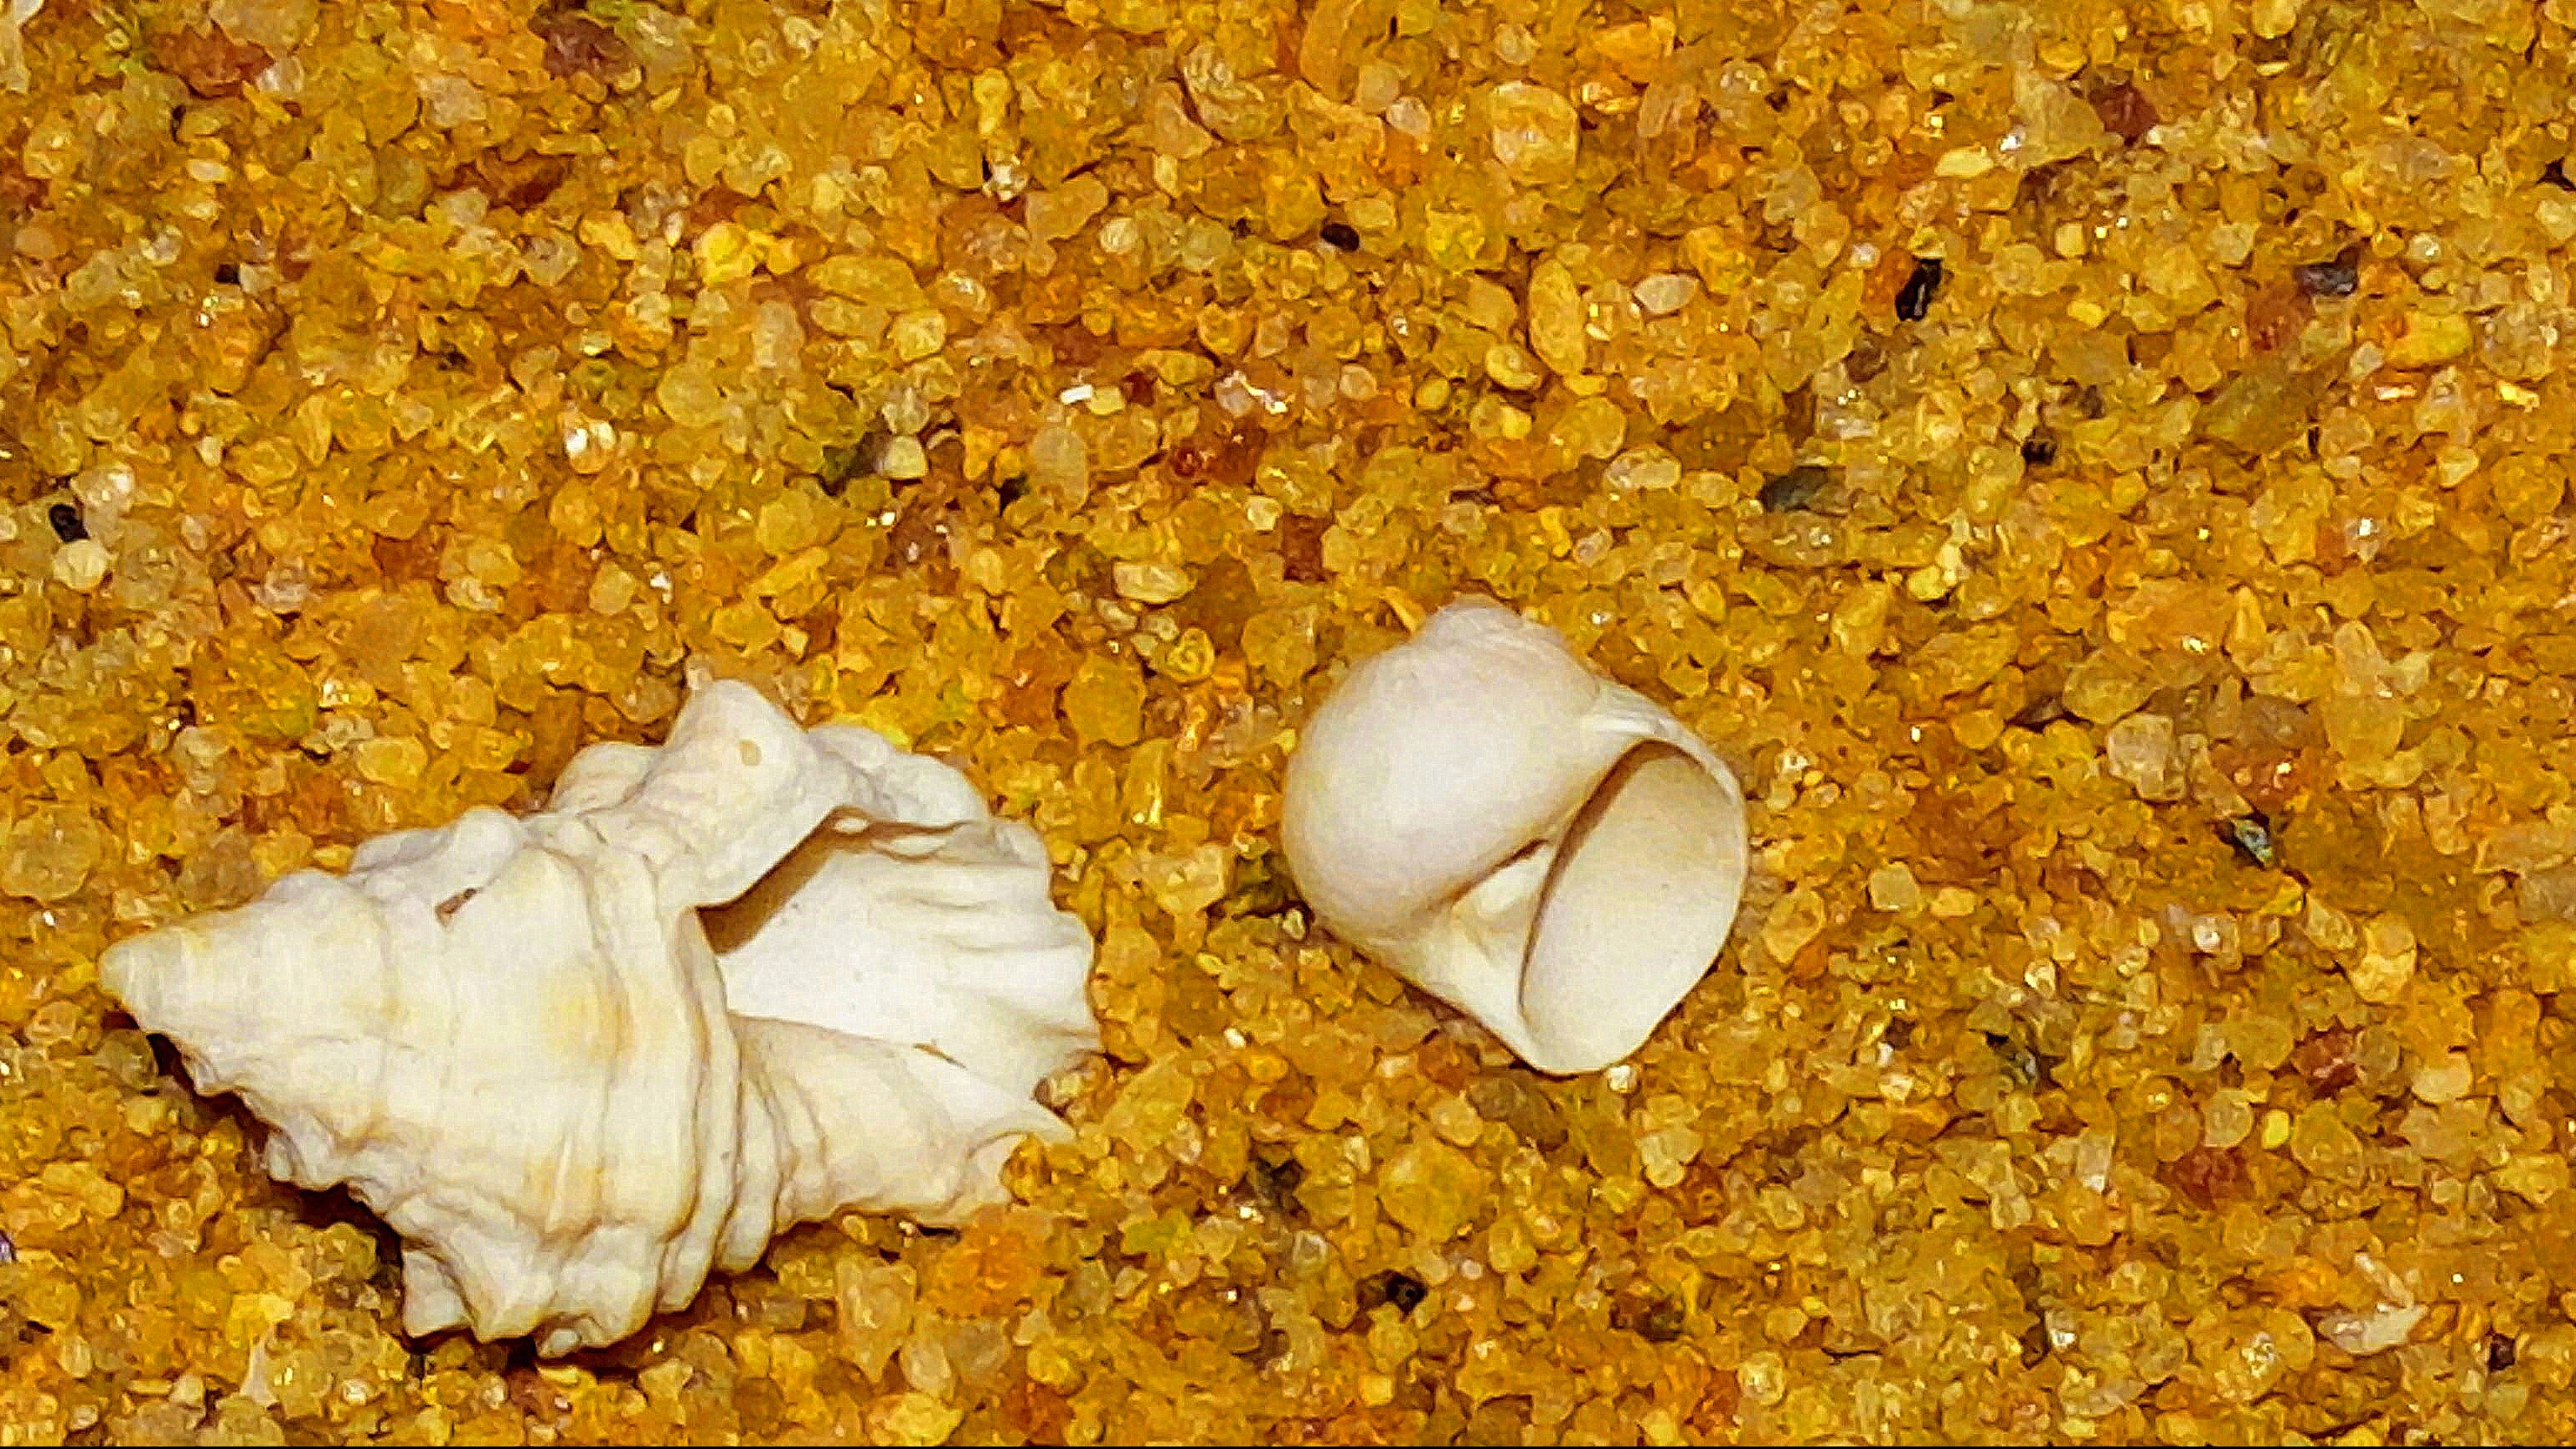 Twist or Turn? - A picture of Conches on the sands of a beach